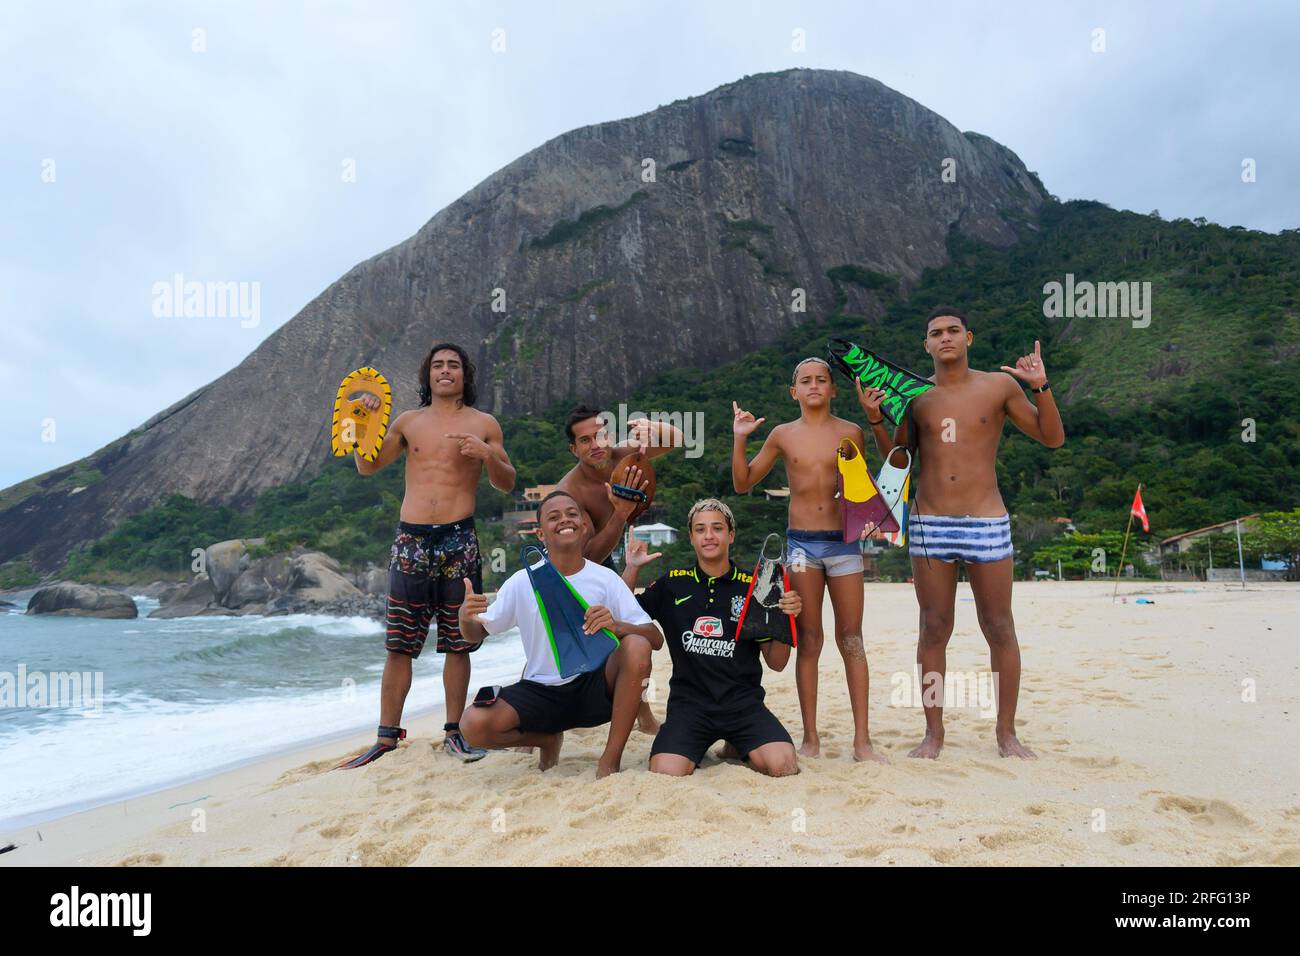 Niteroi, Brazil, Candid portrait of a group of young Brazilian people enjoying the beach. Stock Photo